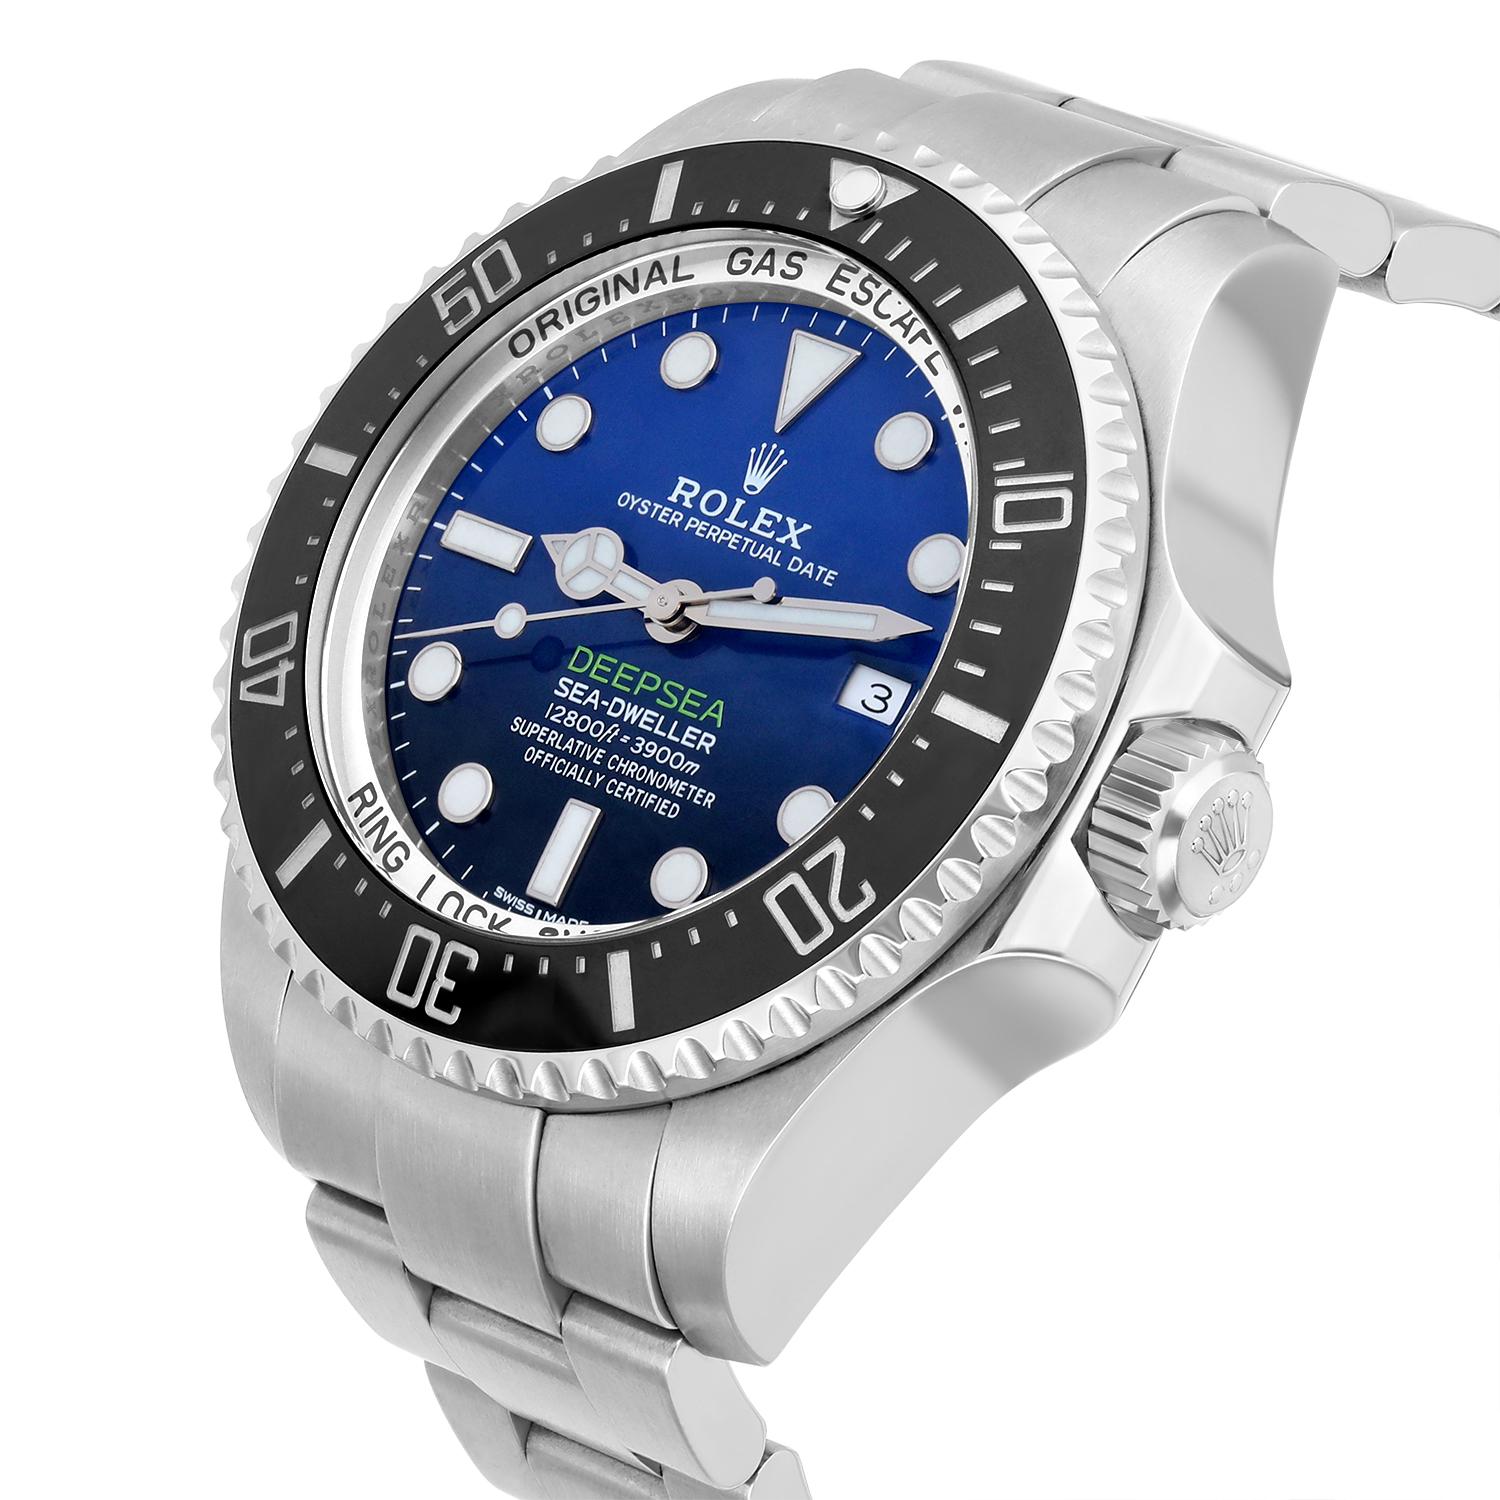 Rolex James Cameron Deepsea Sea-Dweller D-Blue Steel Ceramic Watch 116660 In Excellent Condition For Sale In New York, NY